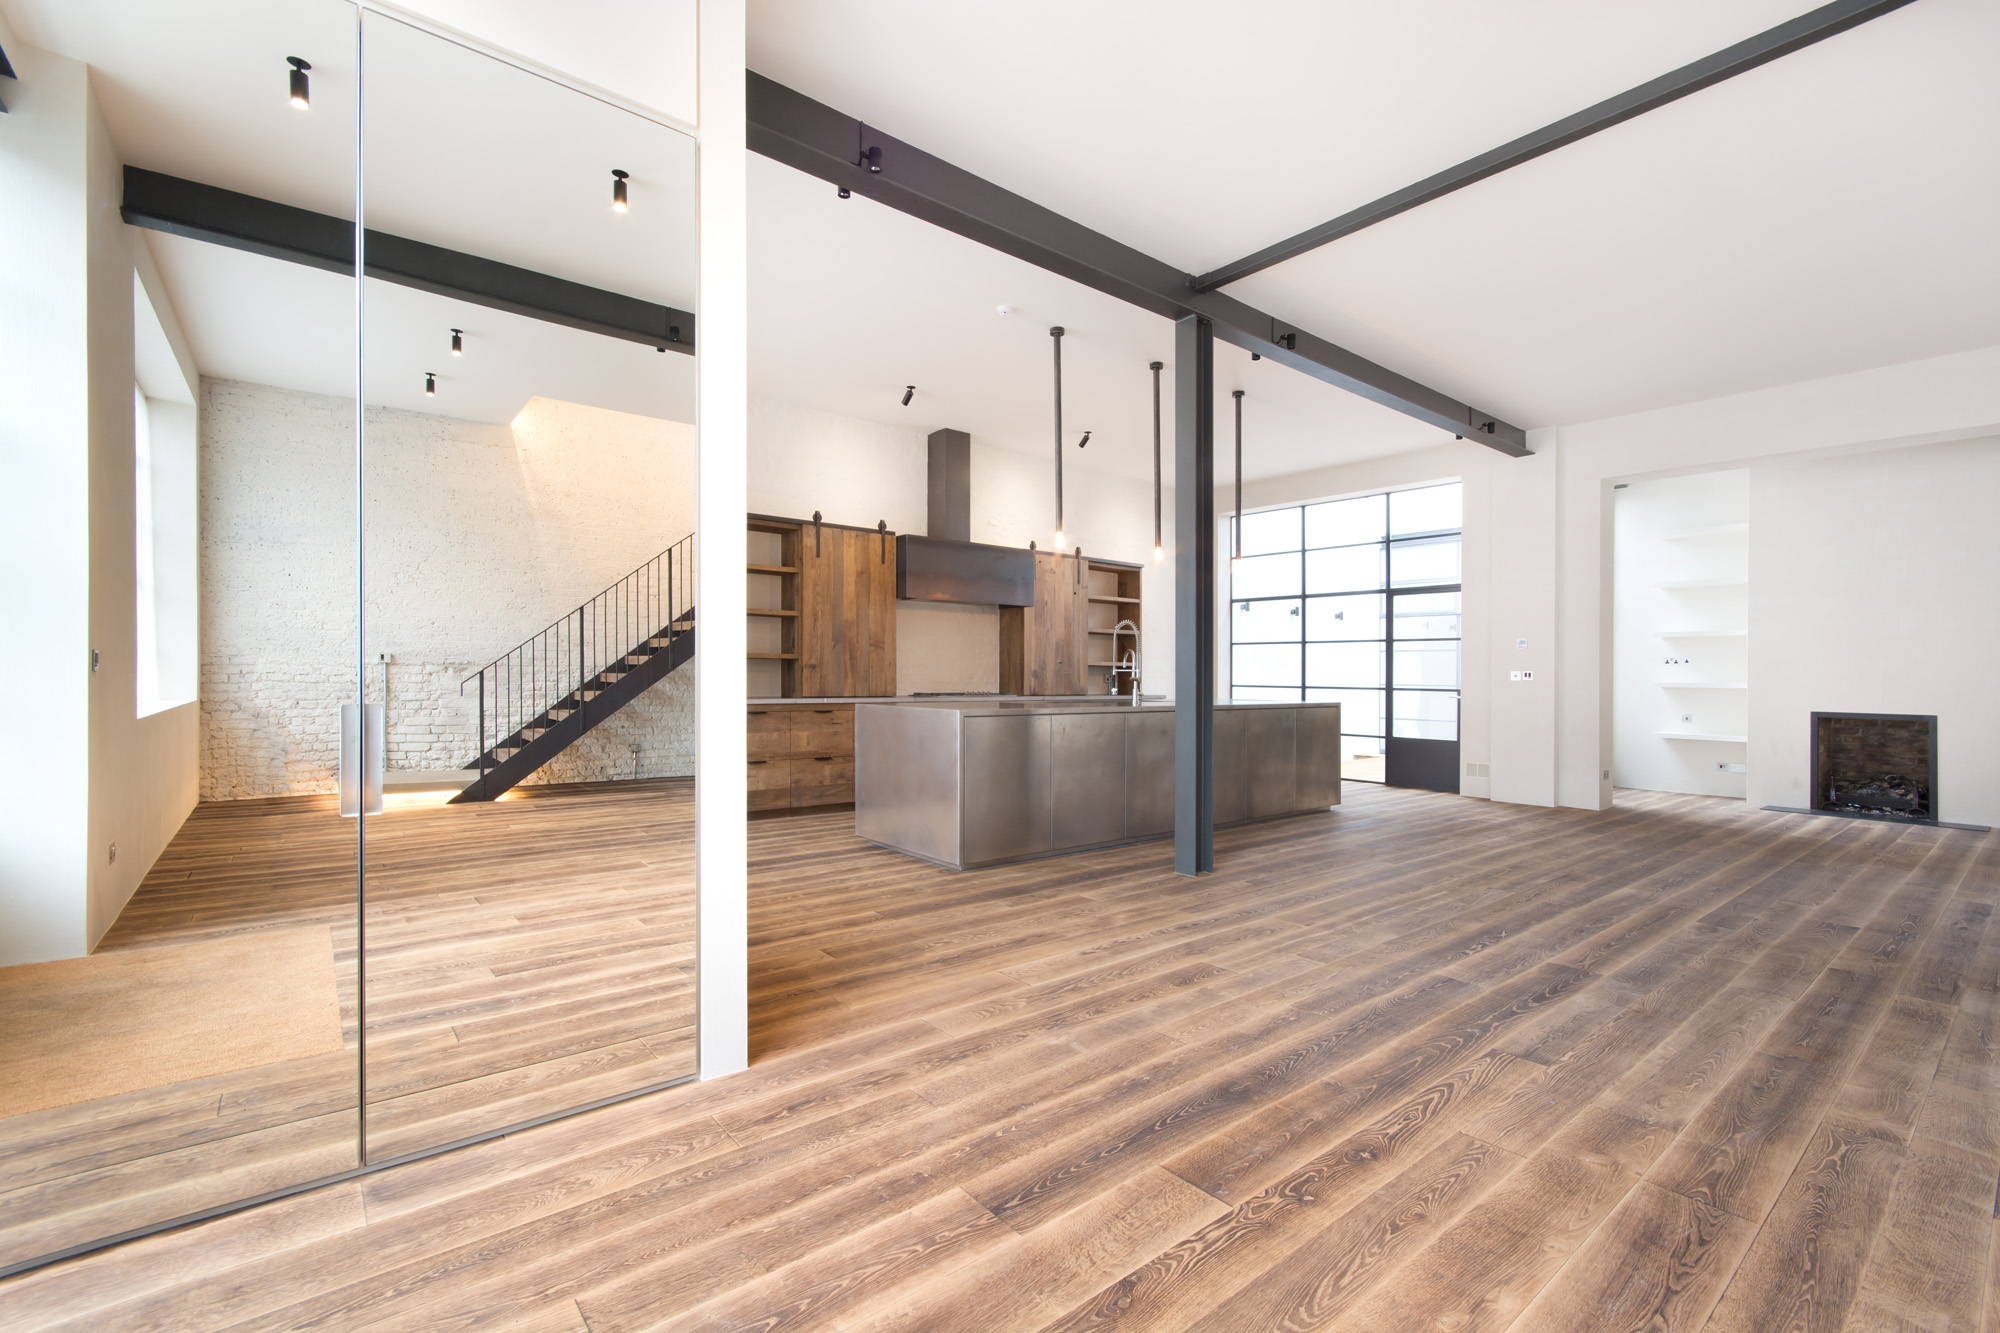 For Rent: Pember House Kensal Green NW10 industrial warehouse kitchen and living space